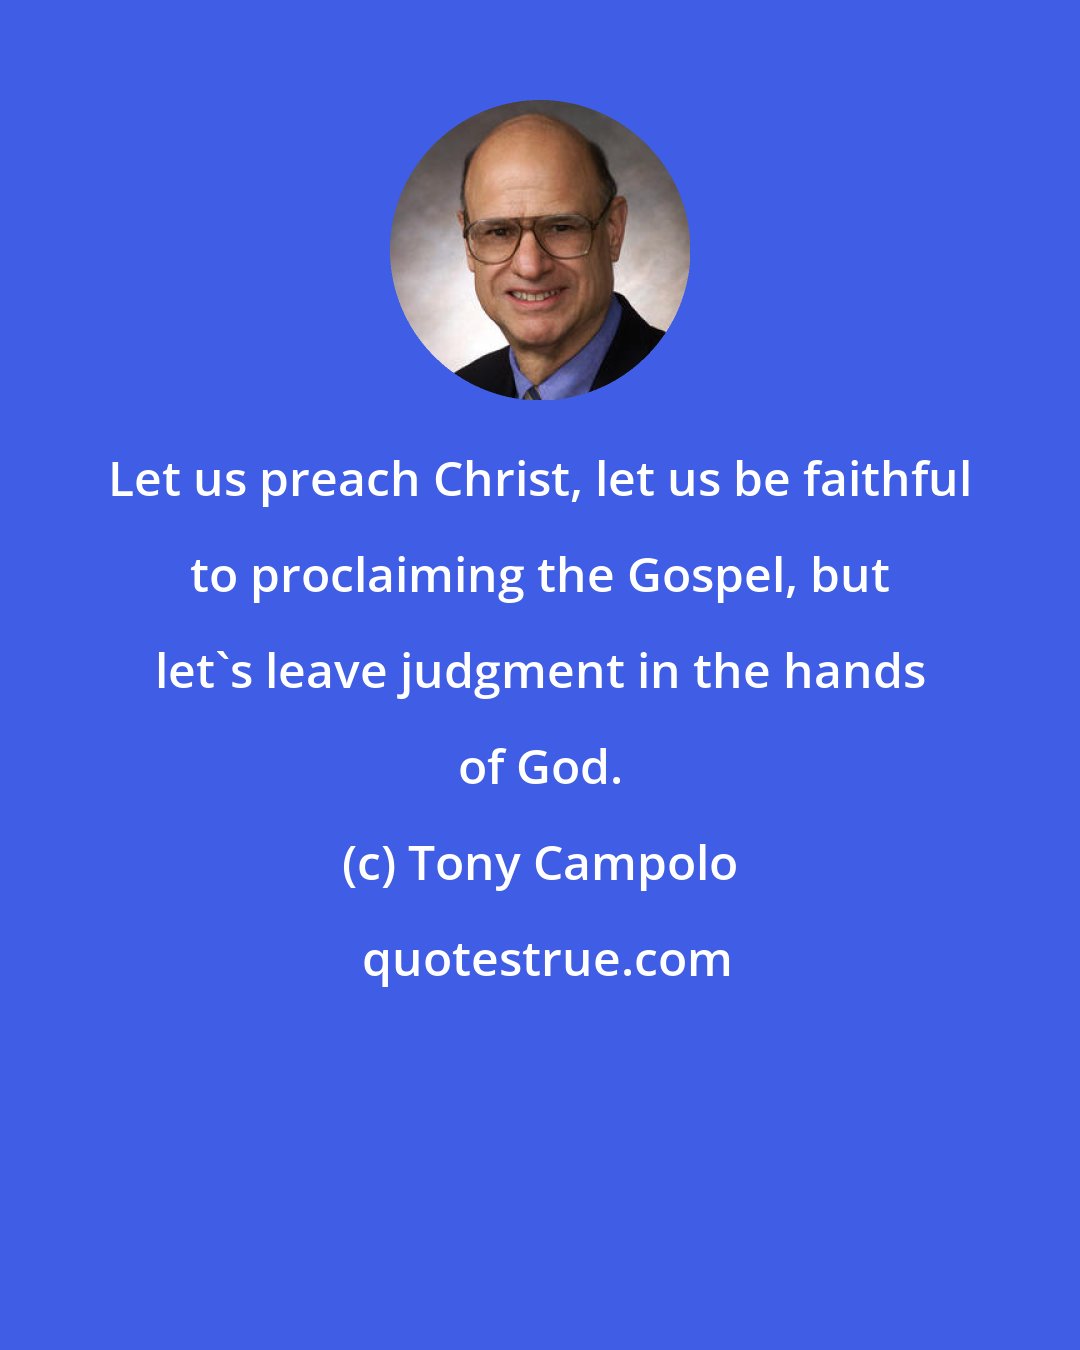 Tony Campolo: Let us preach Christ, let us be faithful to proclaiming the Gospel, but let's leave judgment in the hands of God.